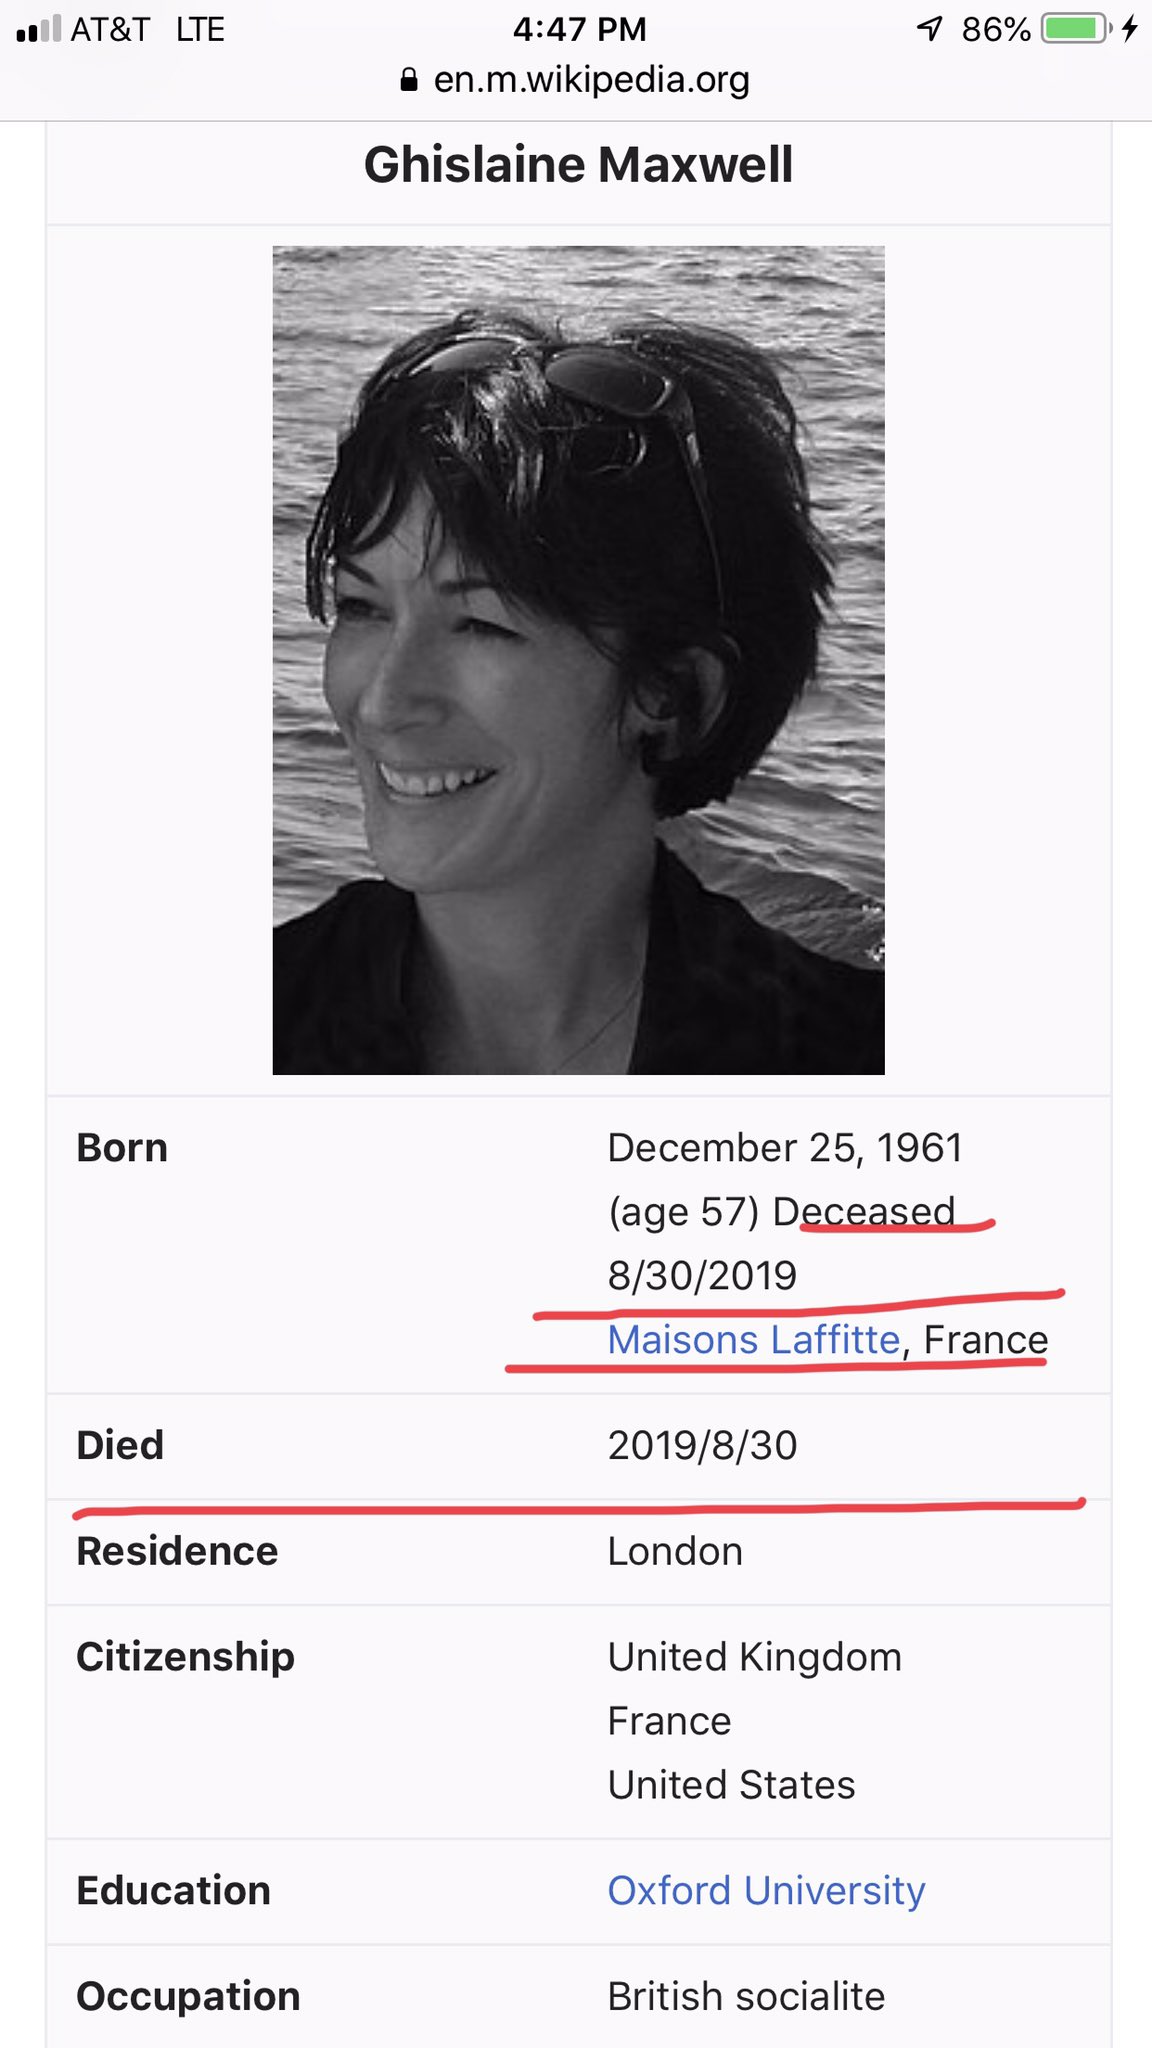 Kirby Sommers Author Feminist Sex Slave Survivor On Twitter Epstein Maxwell Wexner Ghislaine Maxwell Hoped To Pull An Al Seckel Fake Death In August When Her Wiki Page Showed Her As Deceased